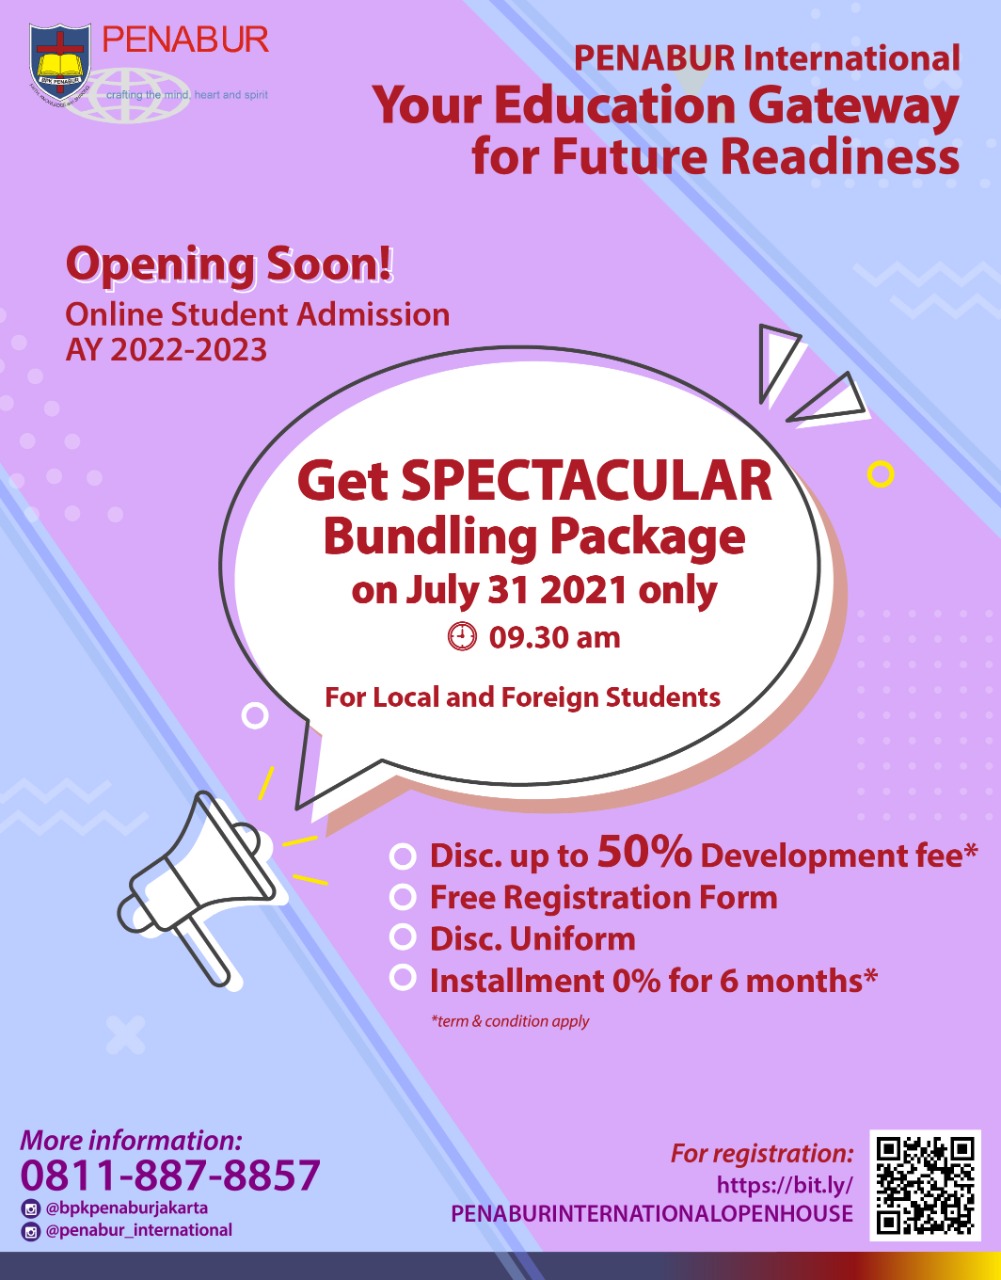 PENABUR International Admission is Open Now for Academic Year 2022-2023!